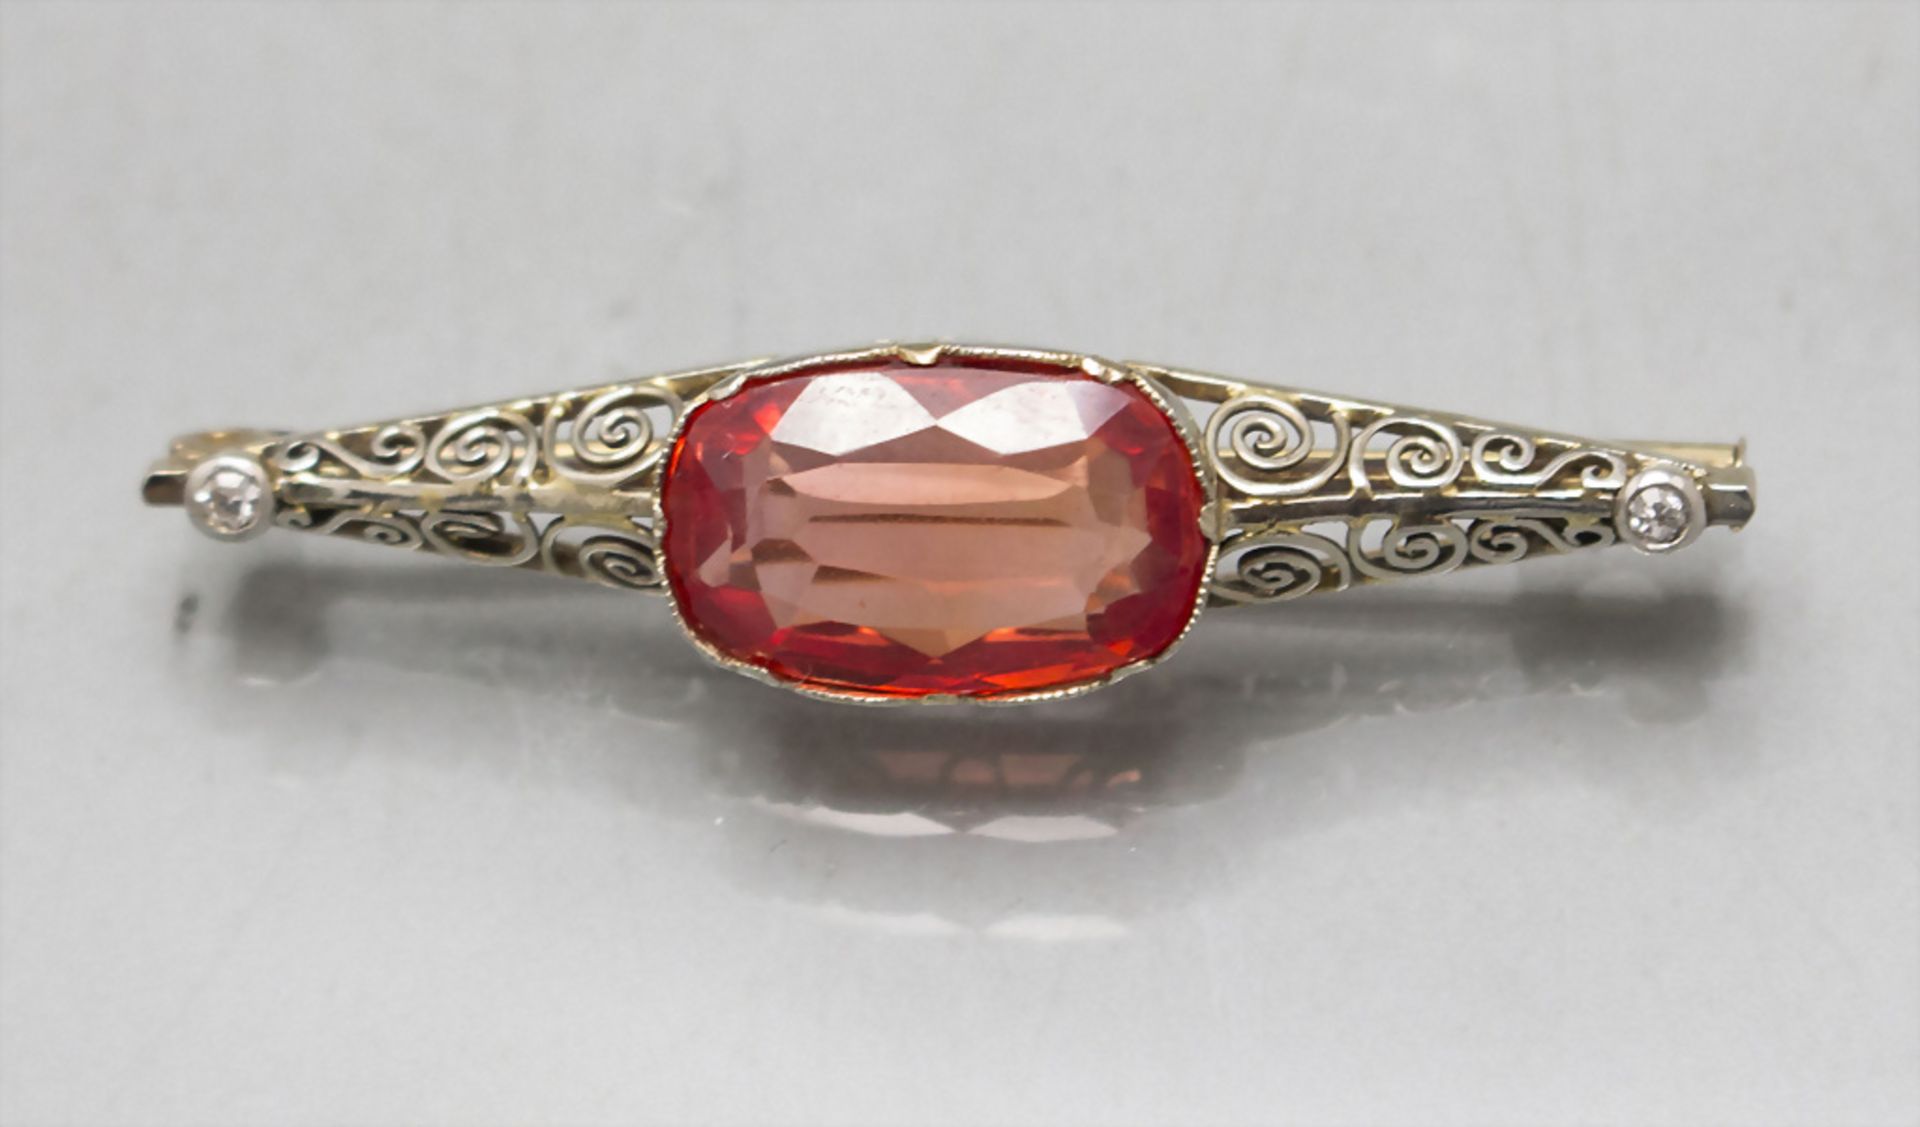 Brosche mit rotem Stein / An 18 ct gold brooch with a red stone